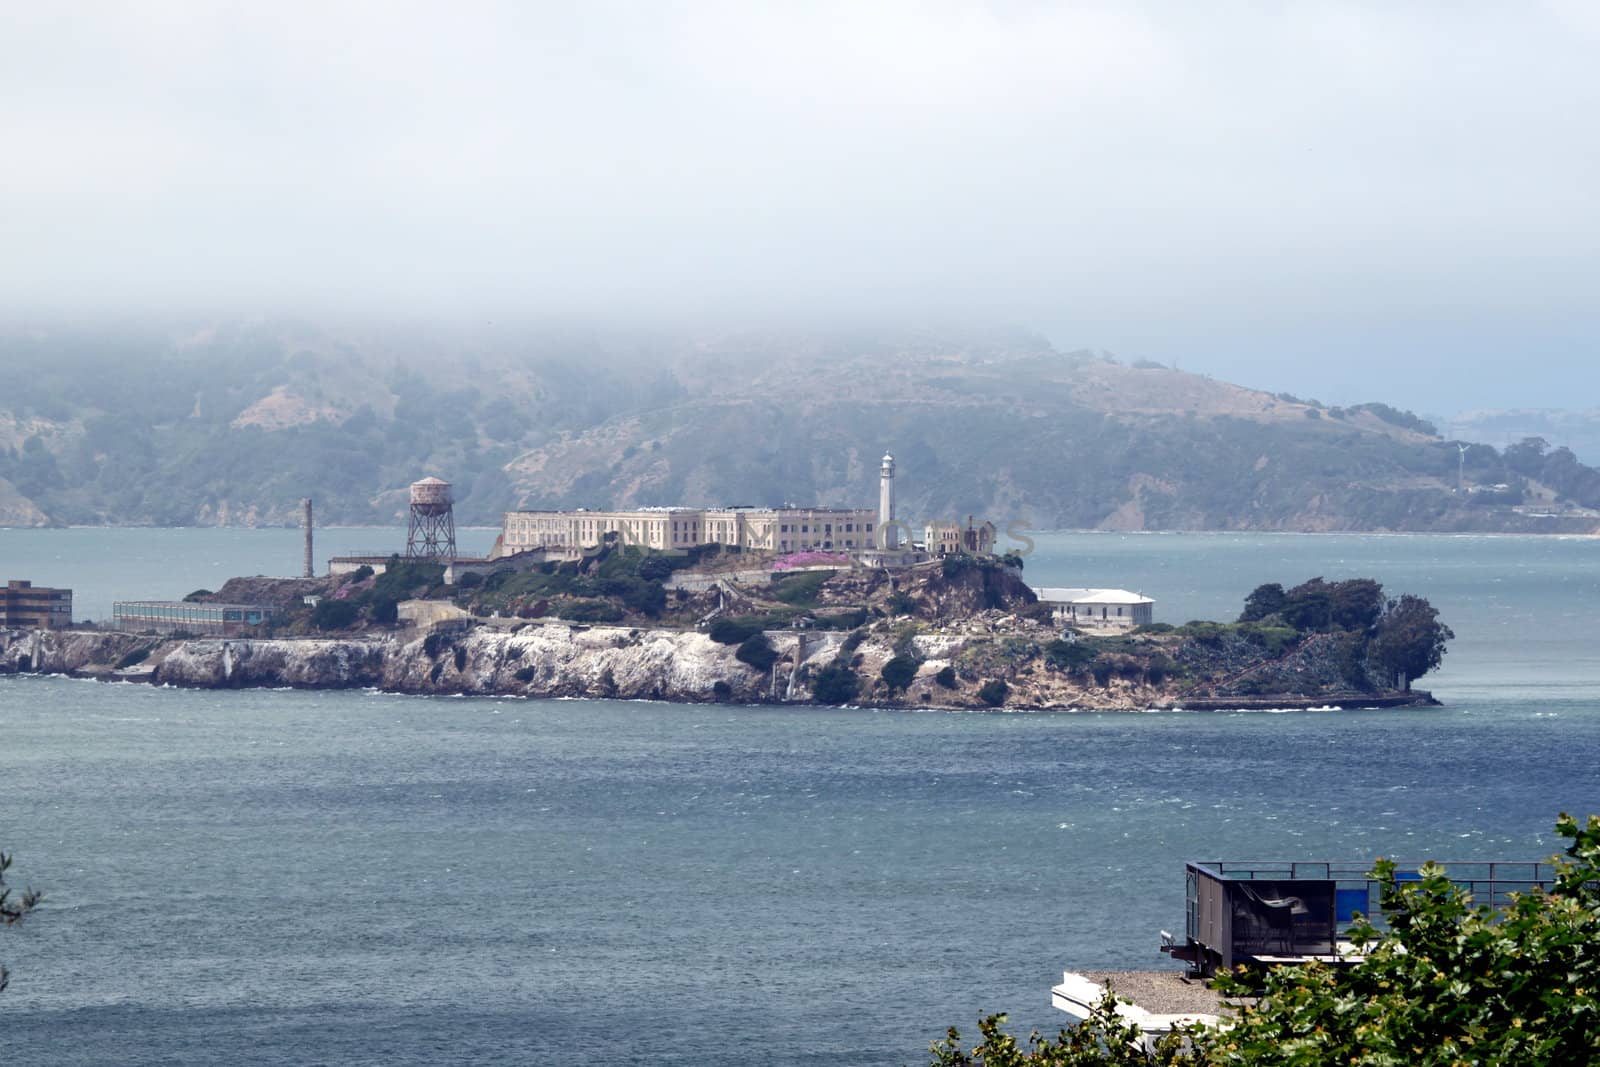 The prison island Alcatraz with a fog bank over it.